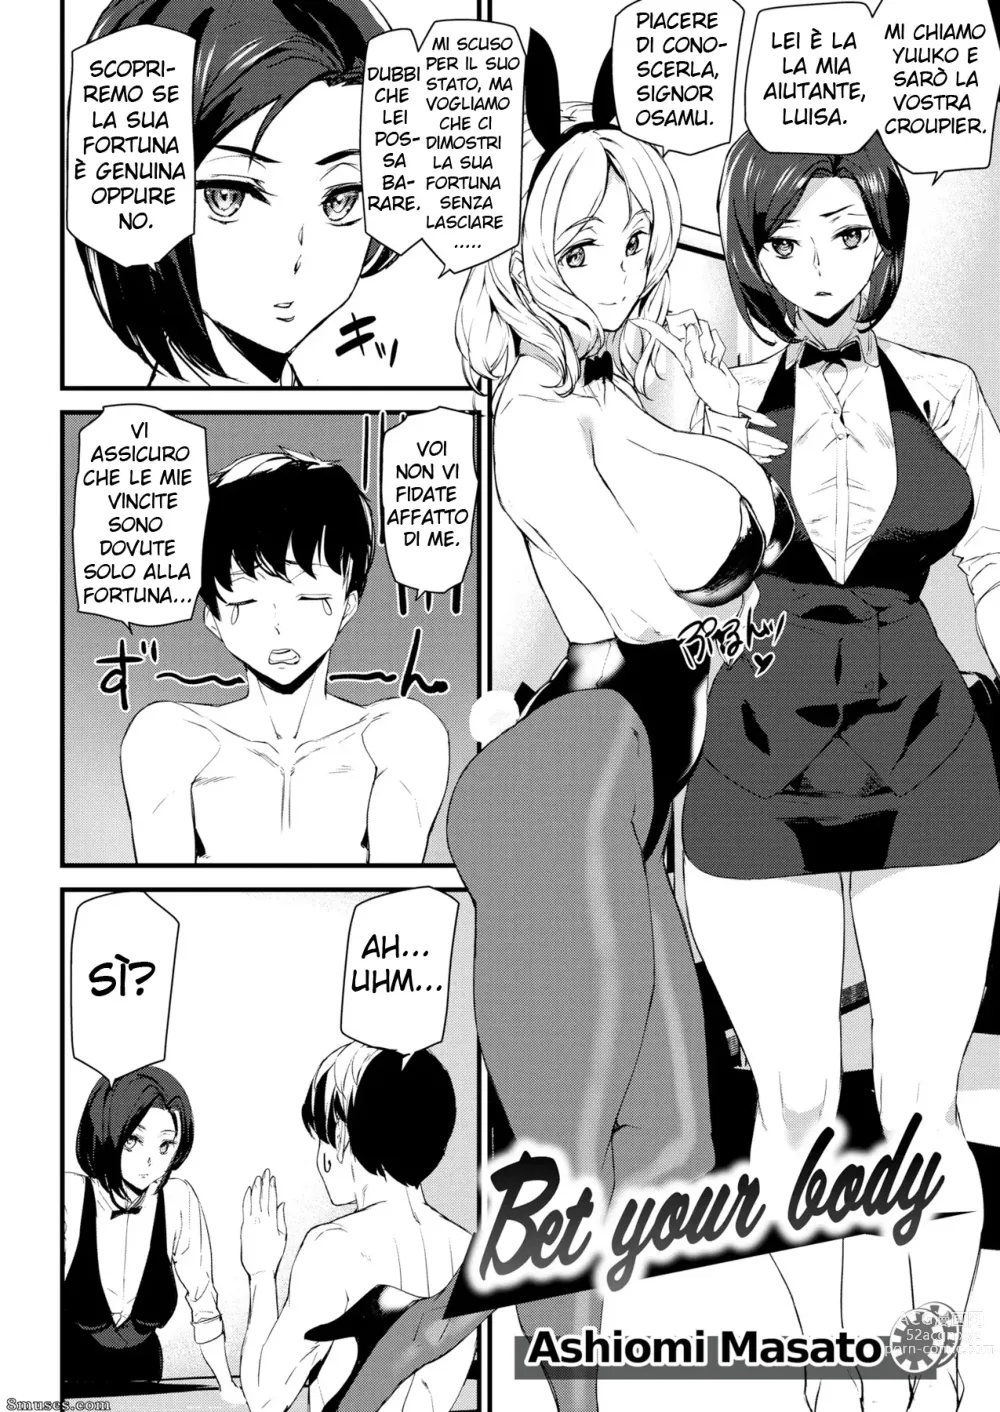 Page 2 of manga Bet your body